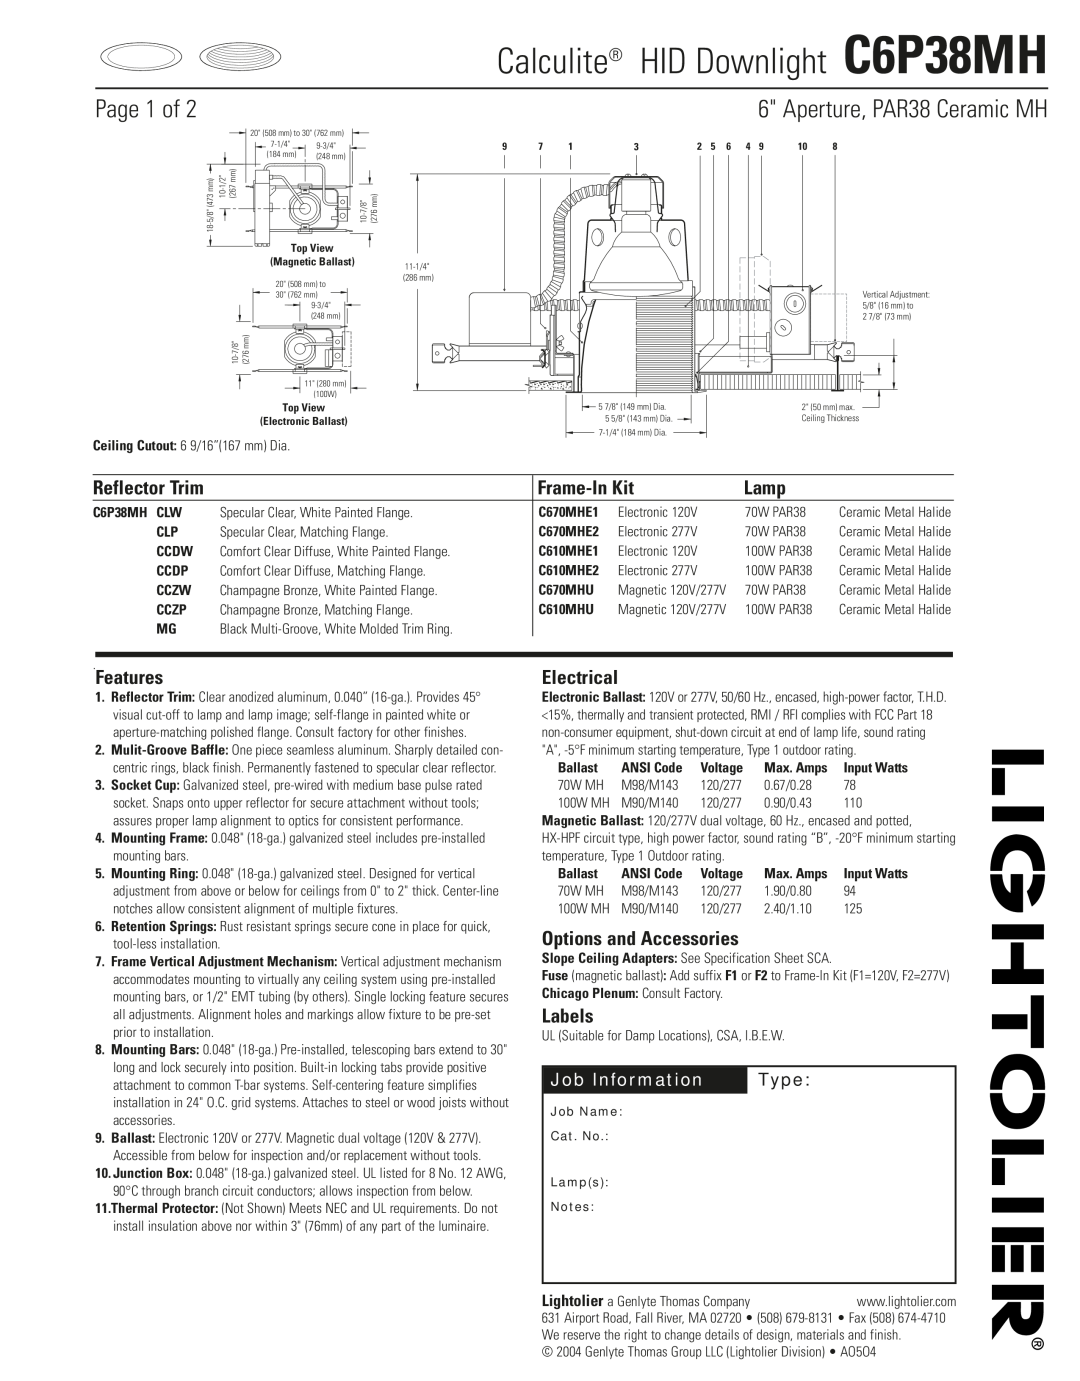 Lightolier specifications Calculite HID Downlight C6P38MH, Page 1 of, Aperture, PAR38 Ceramic MH, Reflector Trim, Type 